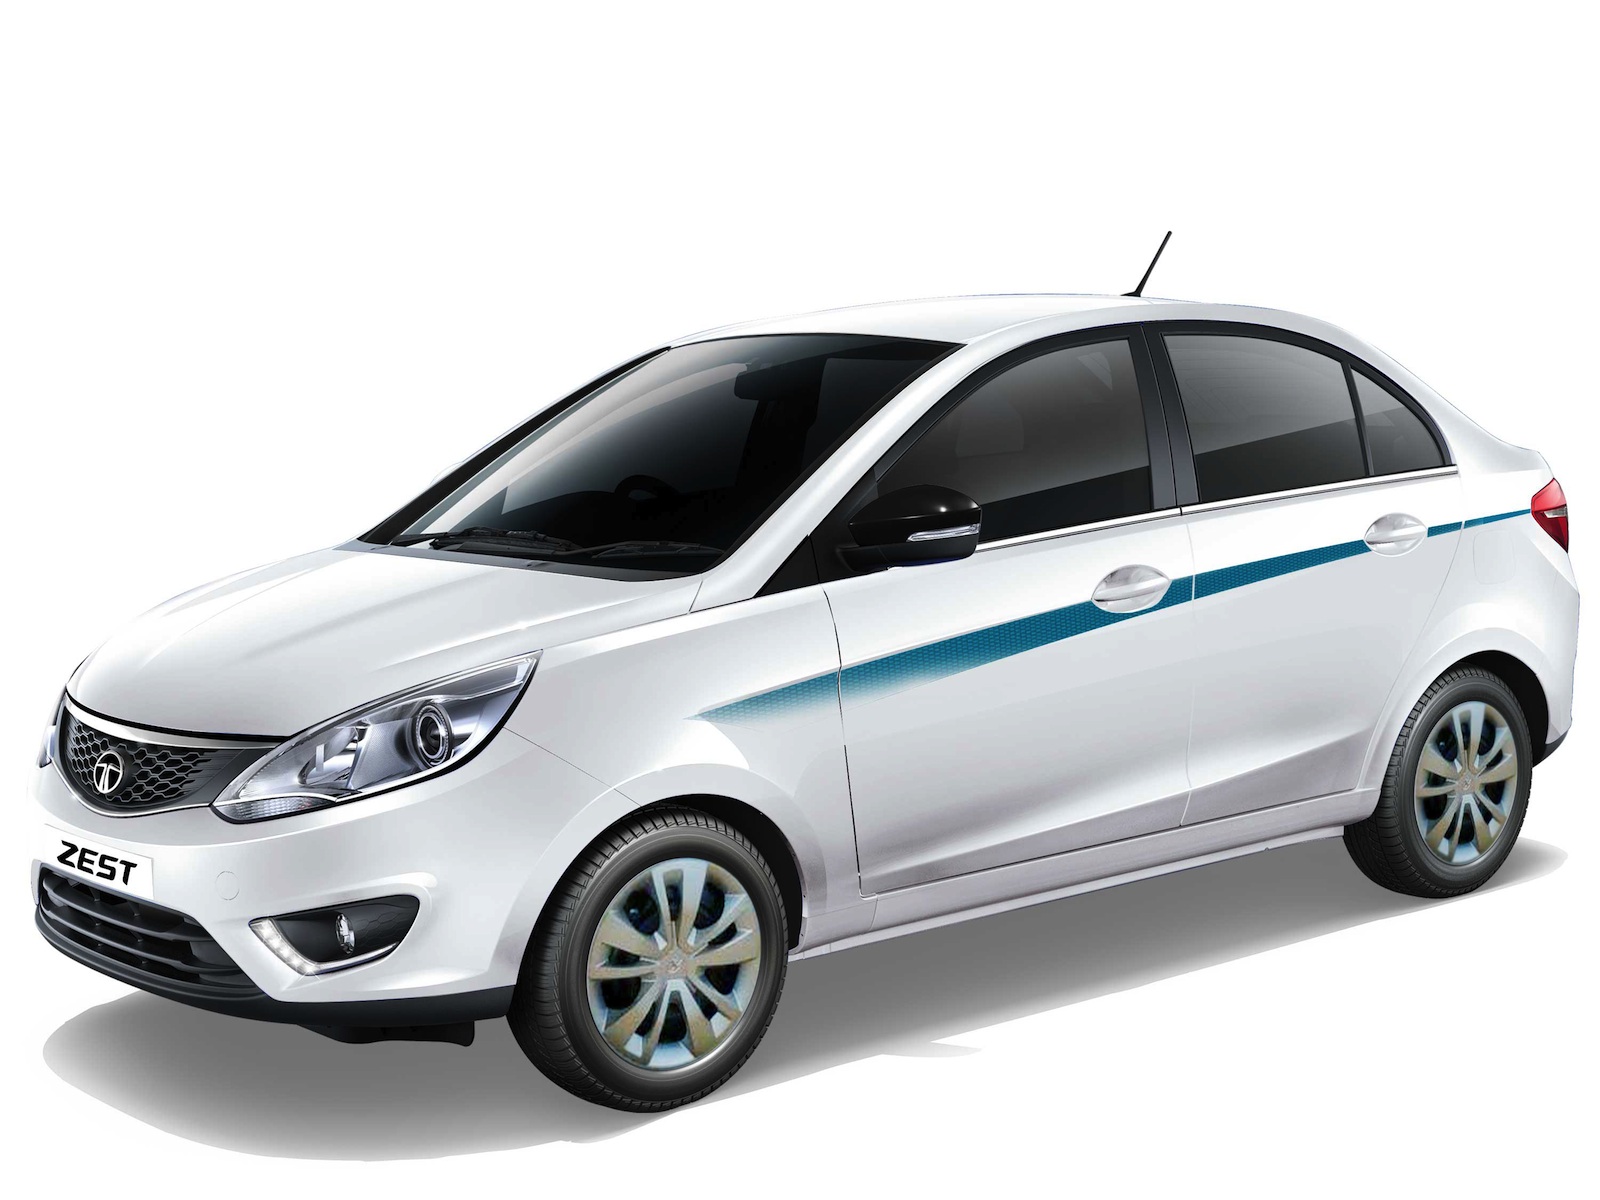 Tata-Zest-Anniversary-Edition-image-official-side